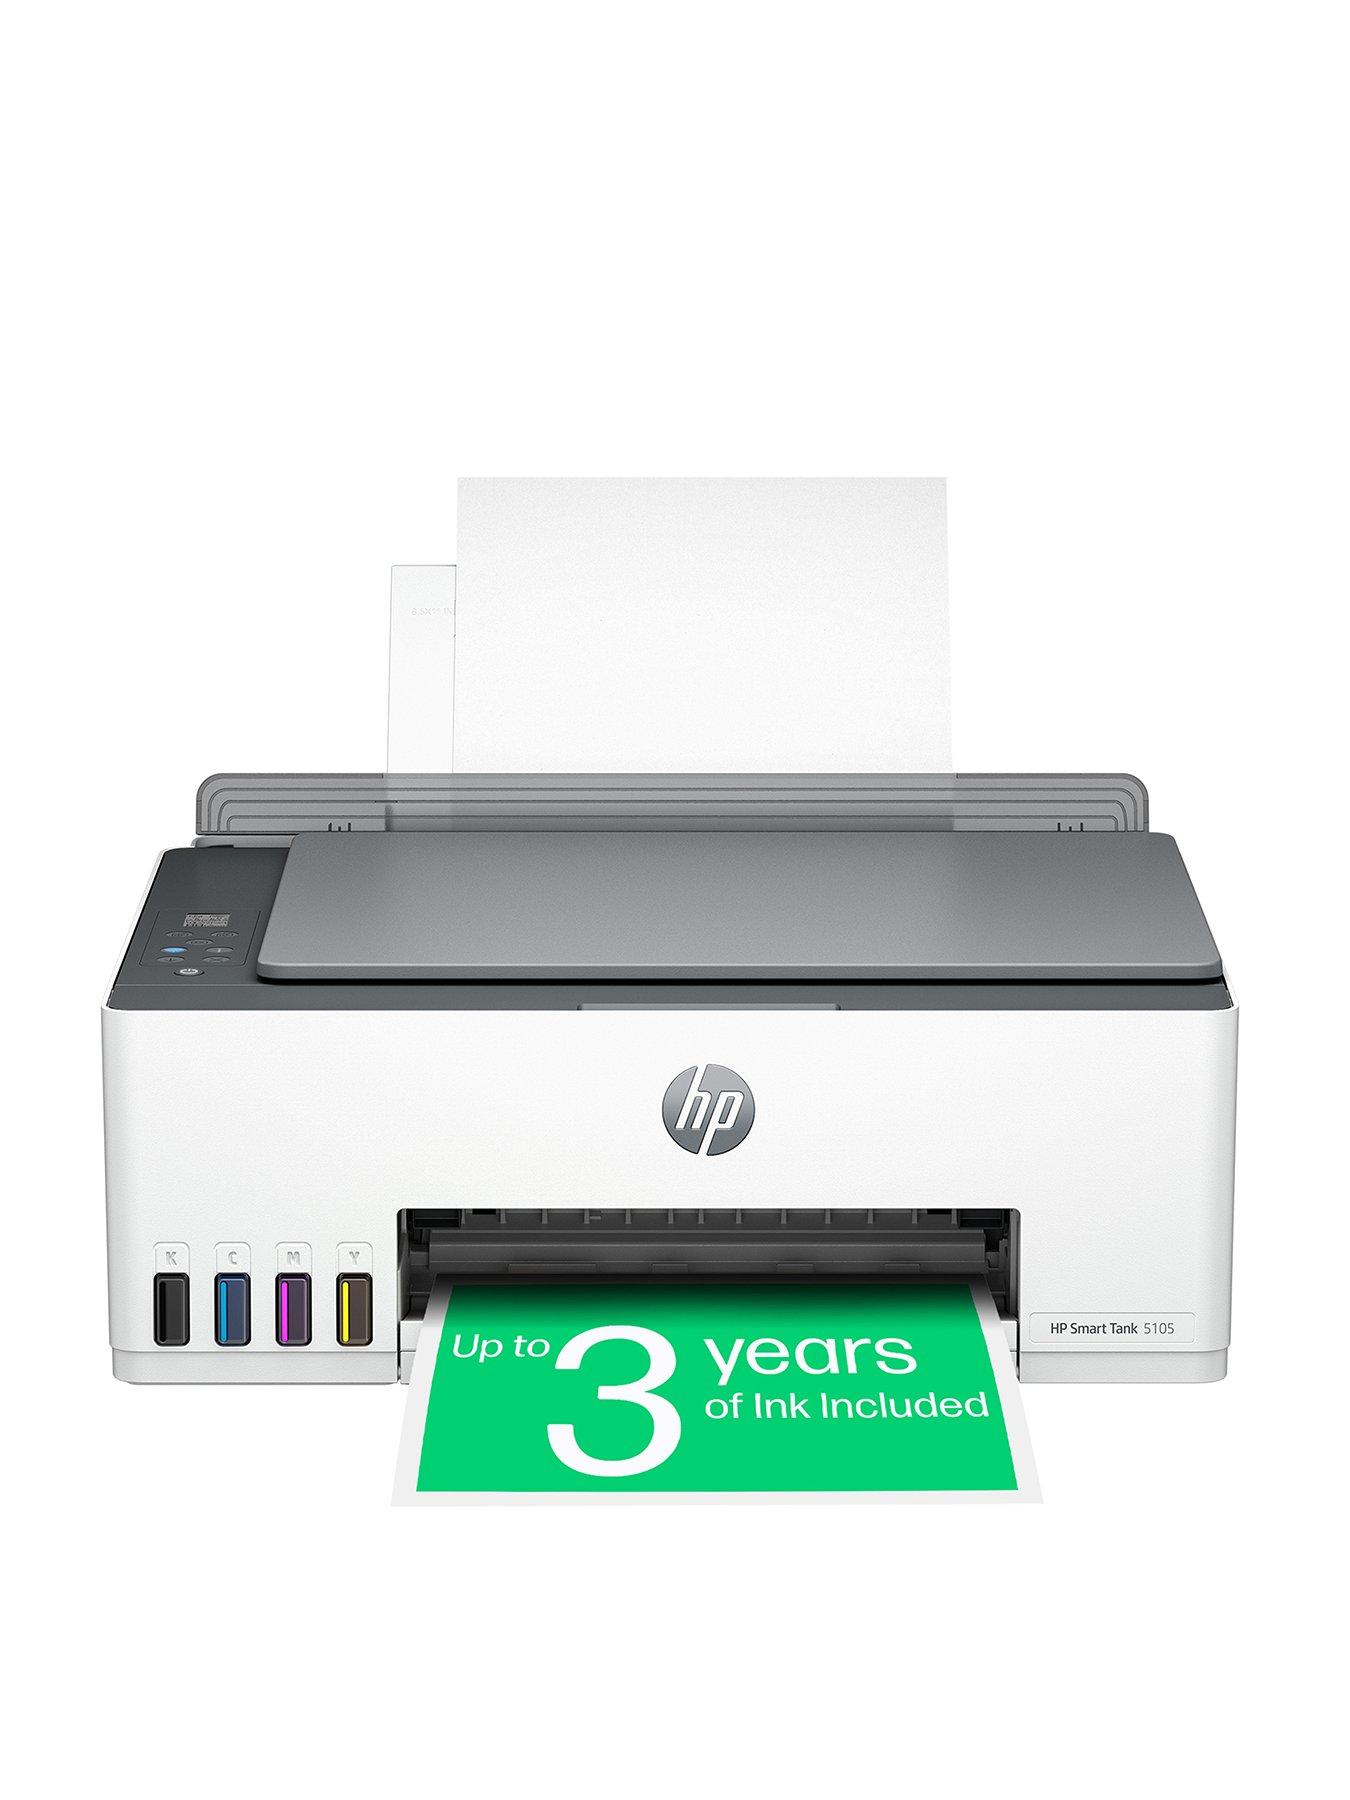 Hp Smart Tank 5105 Wireless All-In-One Colour Printer With Up To 3 Years Of Hp Ink Bottles Included